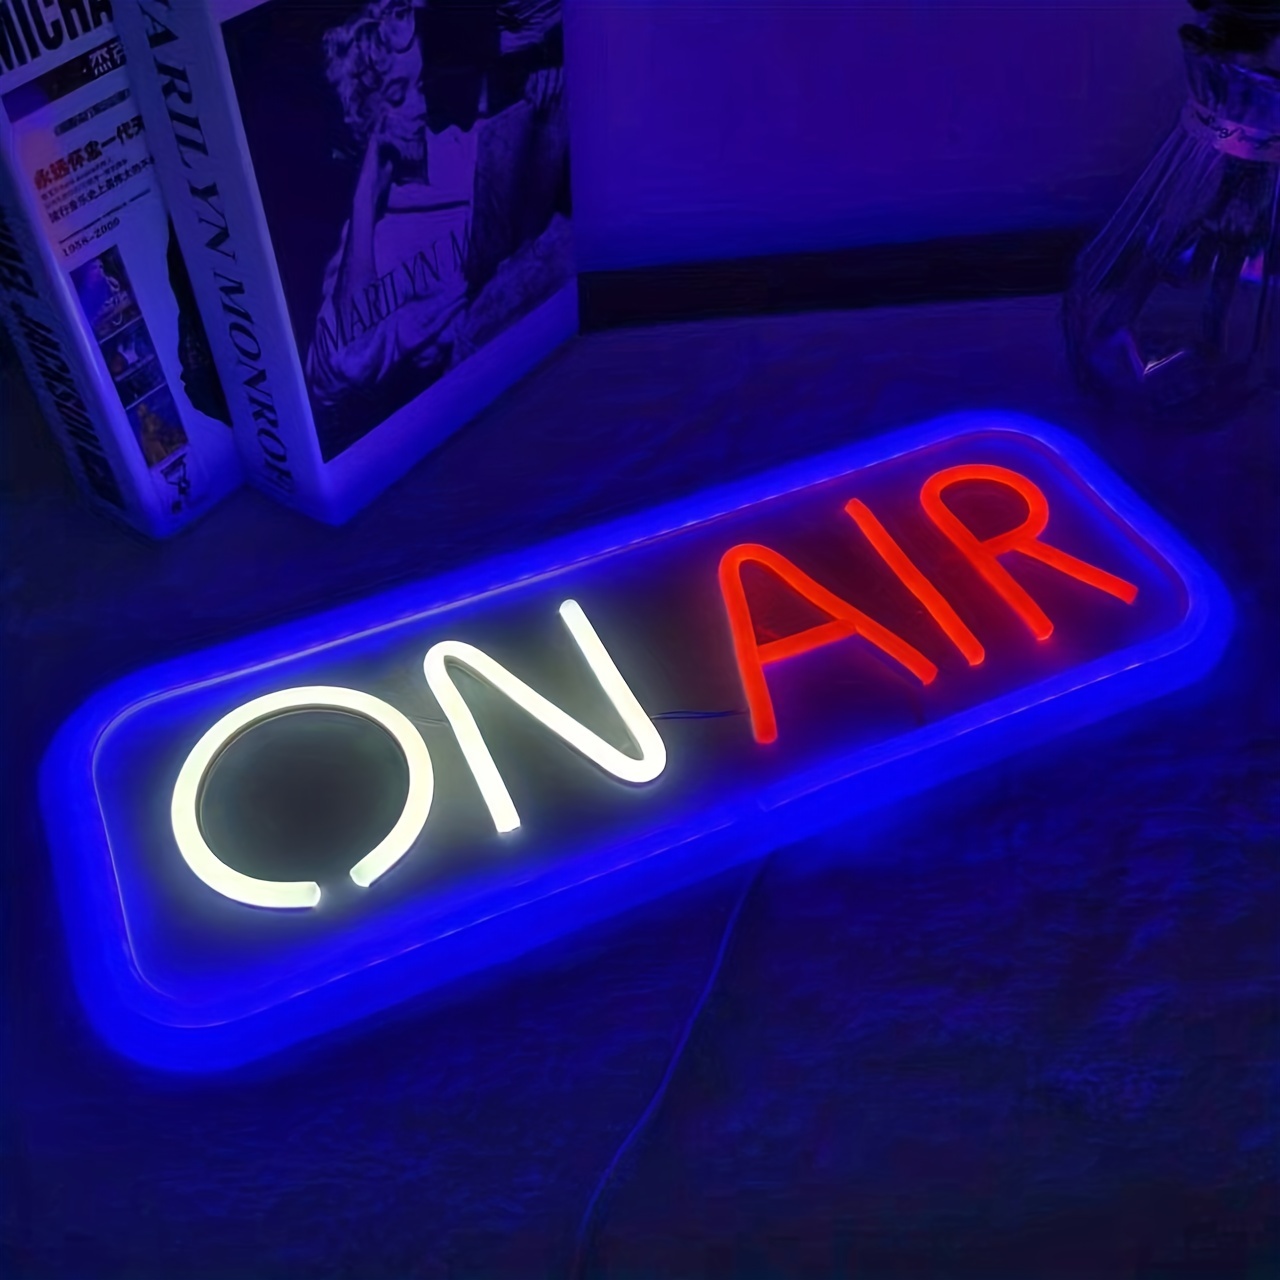 On-Air LED Sign